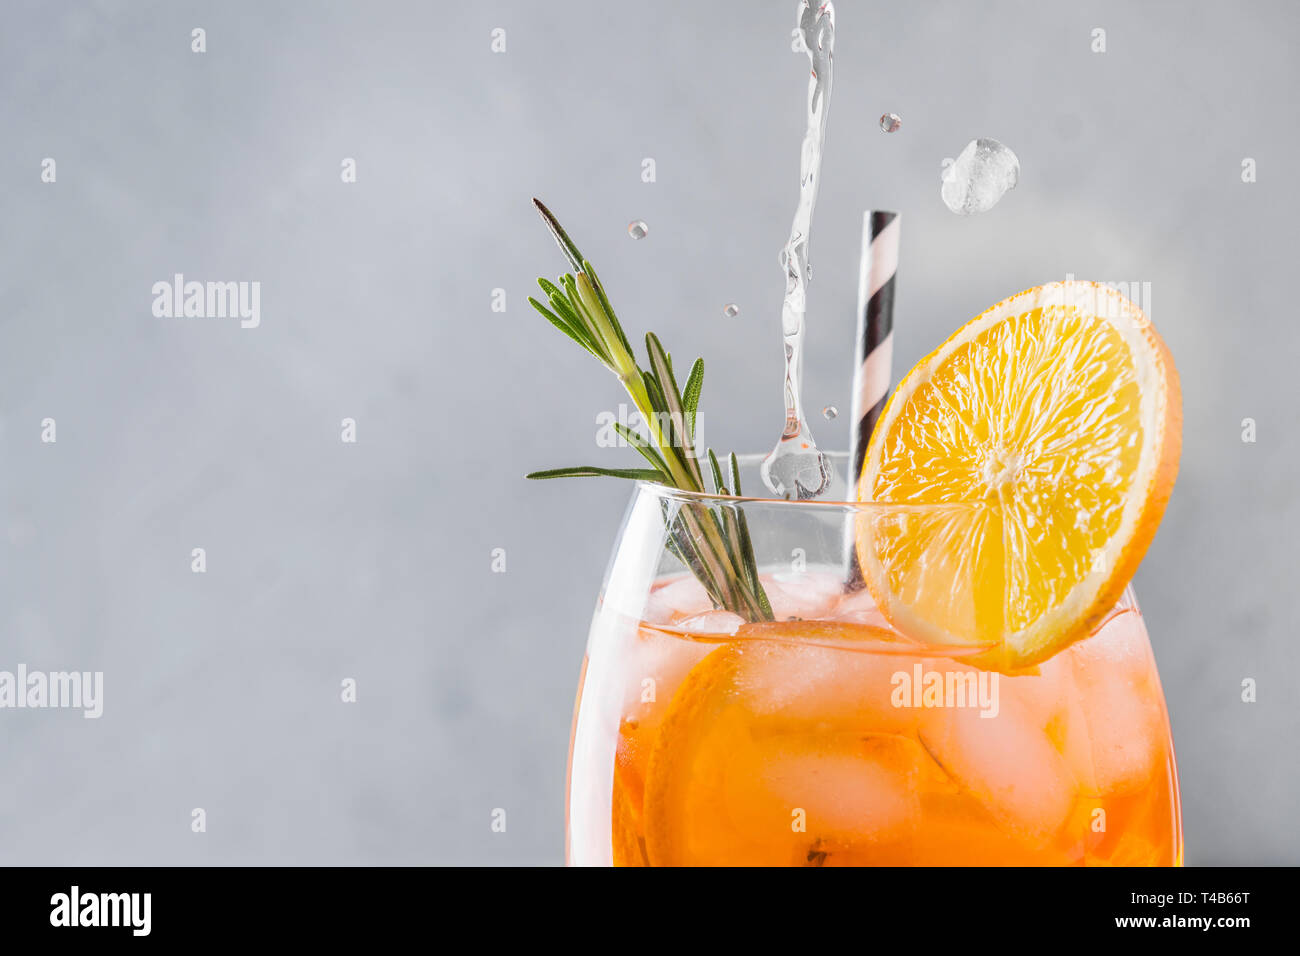 Classic Italian aperol spritz cocktail in wine glass on light. Close up. Stock Photo